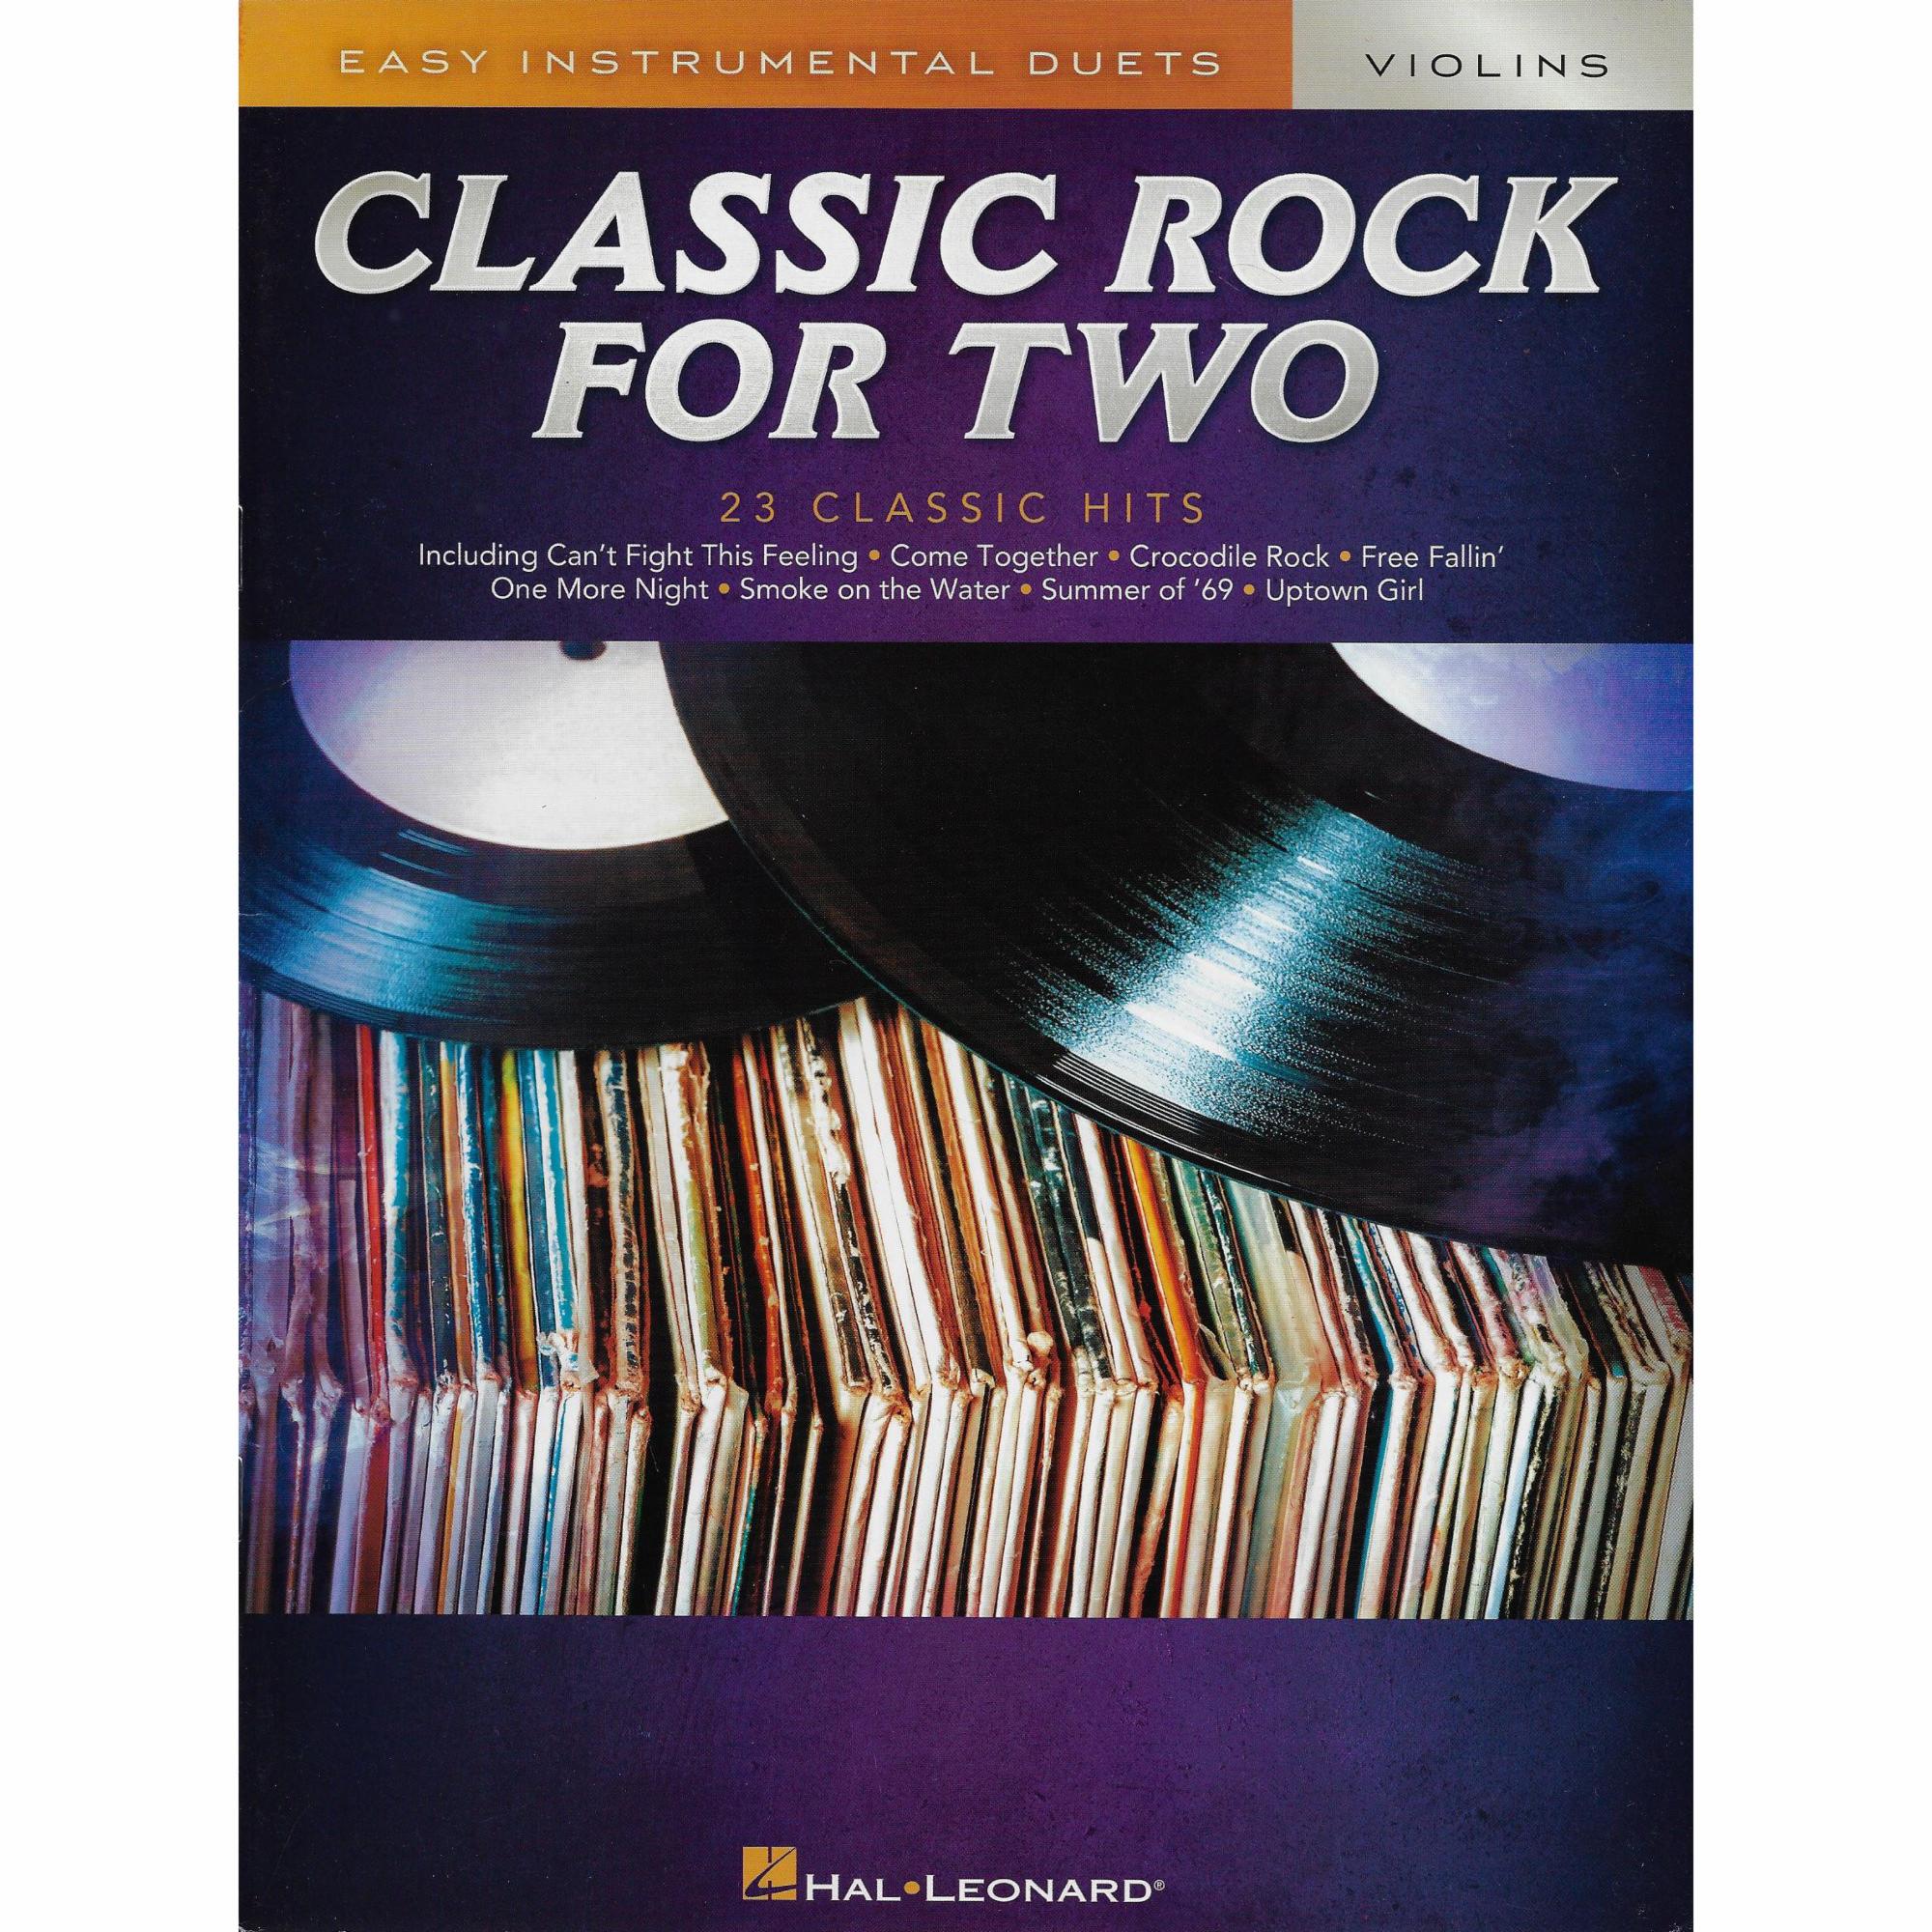 Classic Rock for Two Violins or Two Cellos